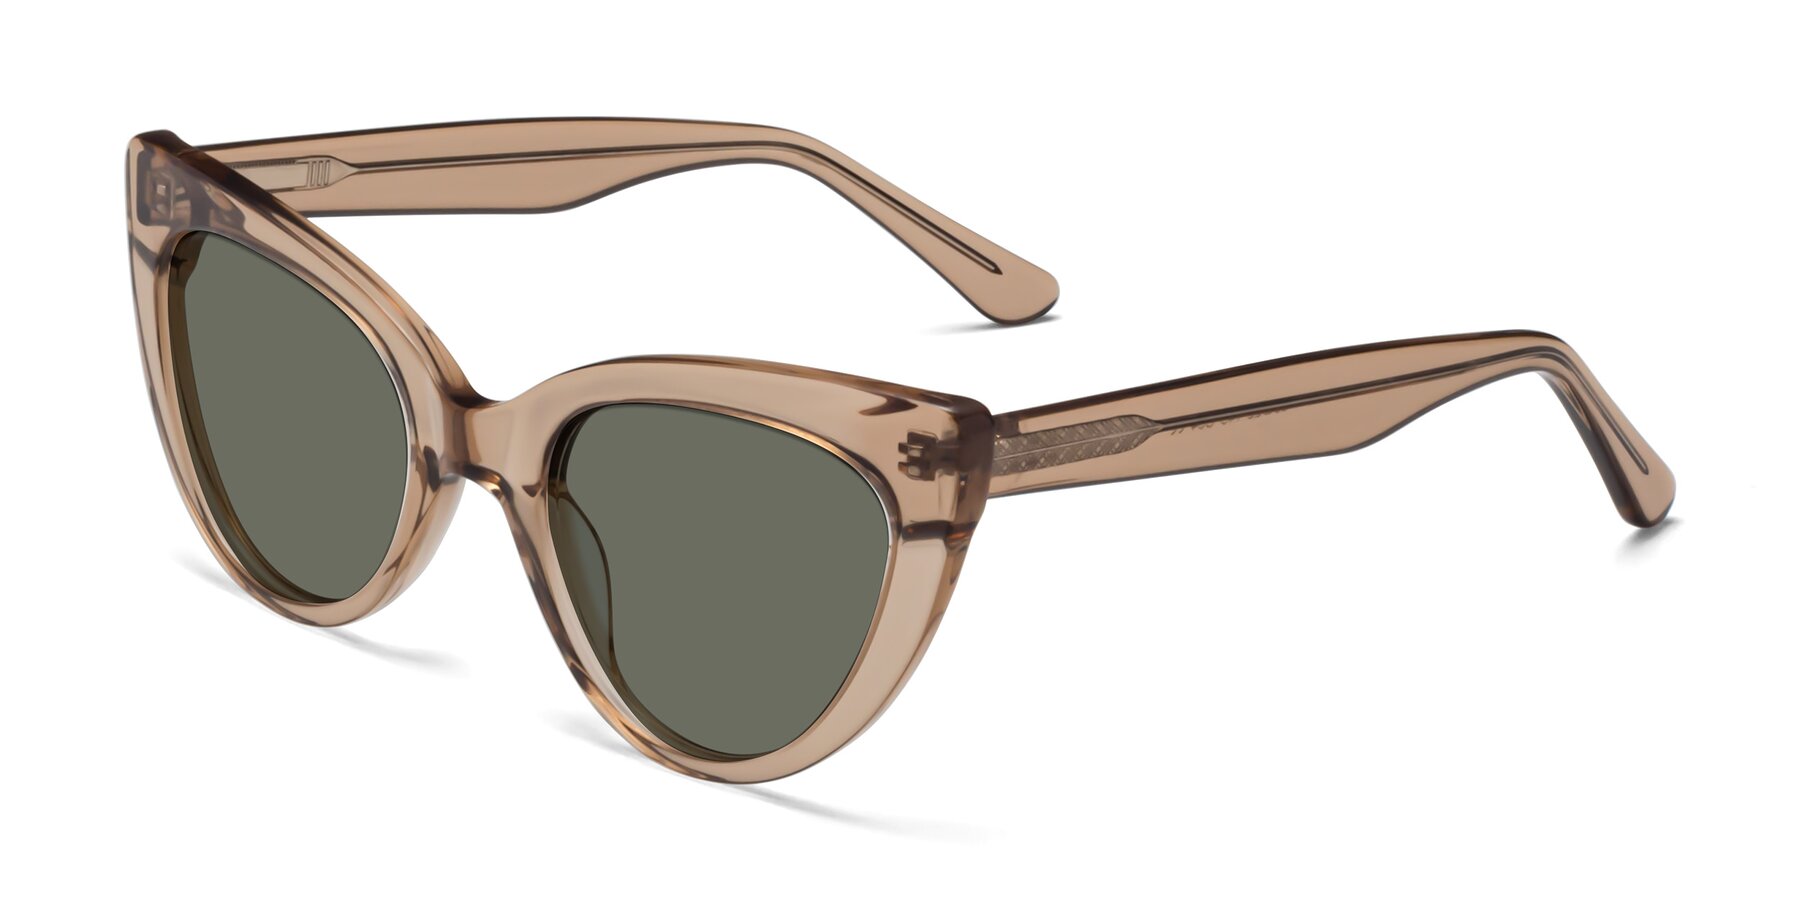 Angle of Tiesi in Caramel with Gray Polarized Lenses